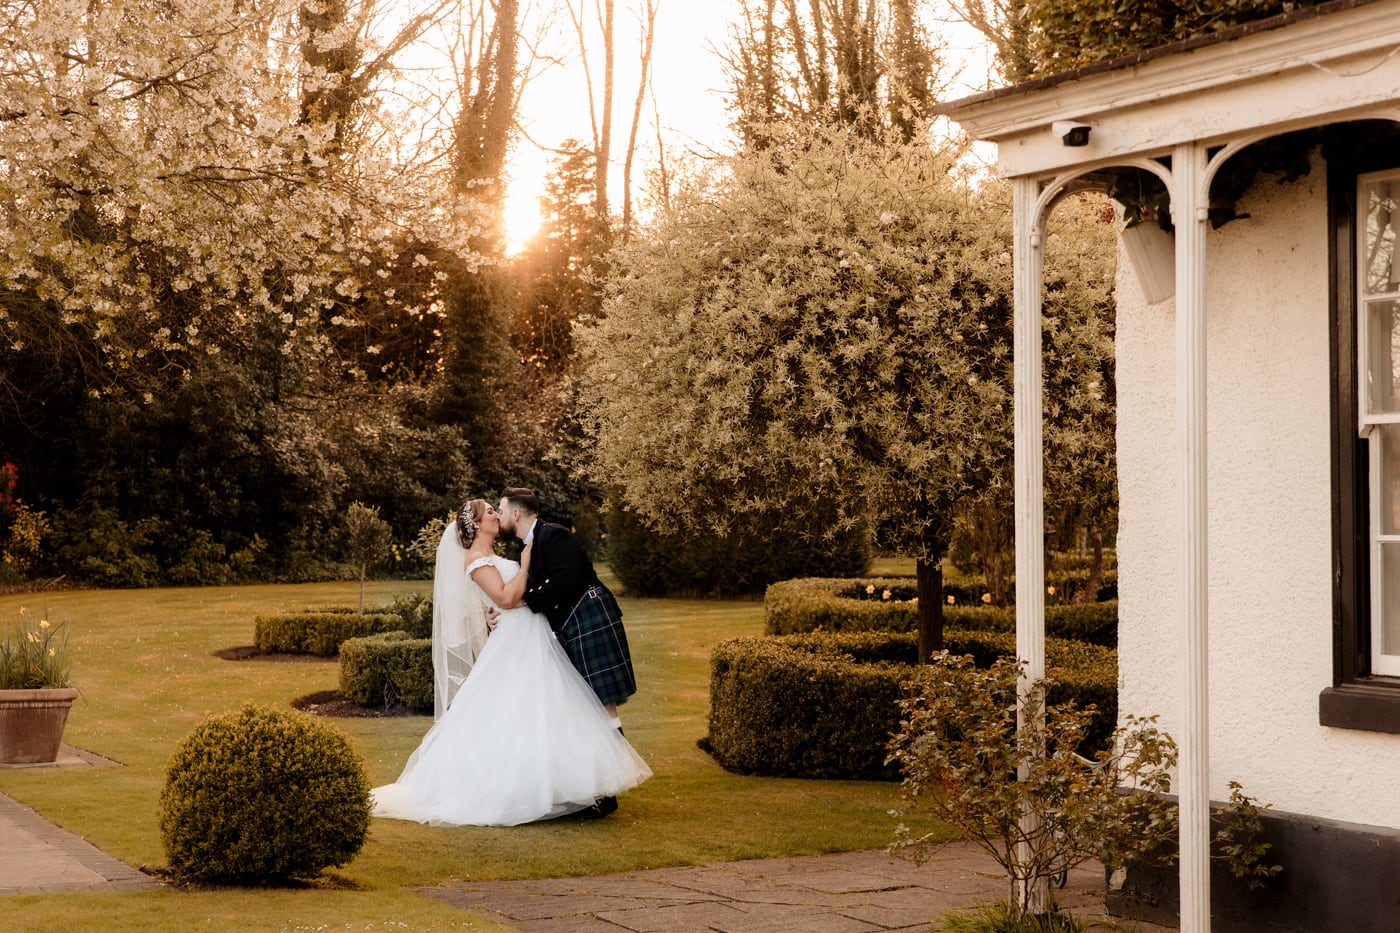 Chelsey and karl at statham lodge in lymm a beautiful wedding venue